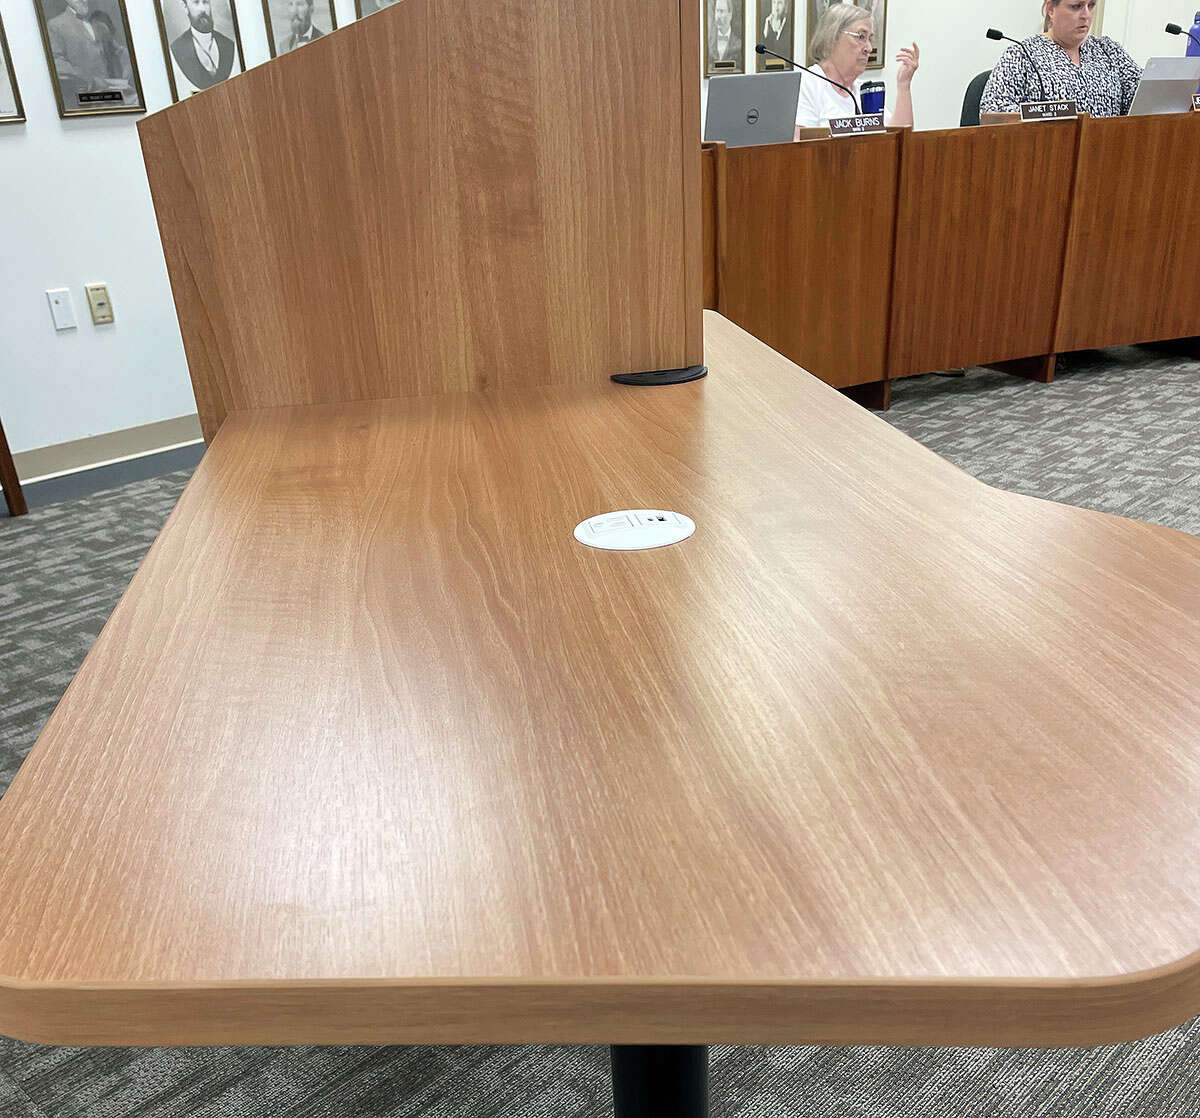 A shot of the ADA-accessible podium and table now in Edwardsville's city council chamber. 